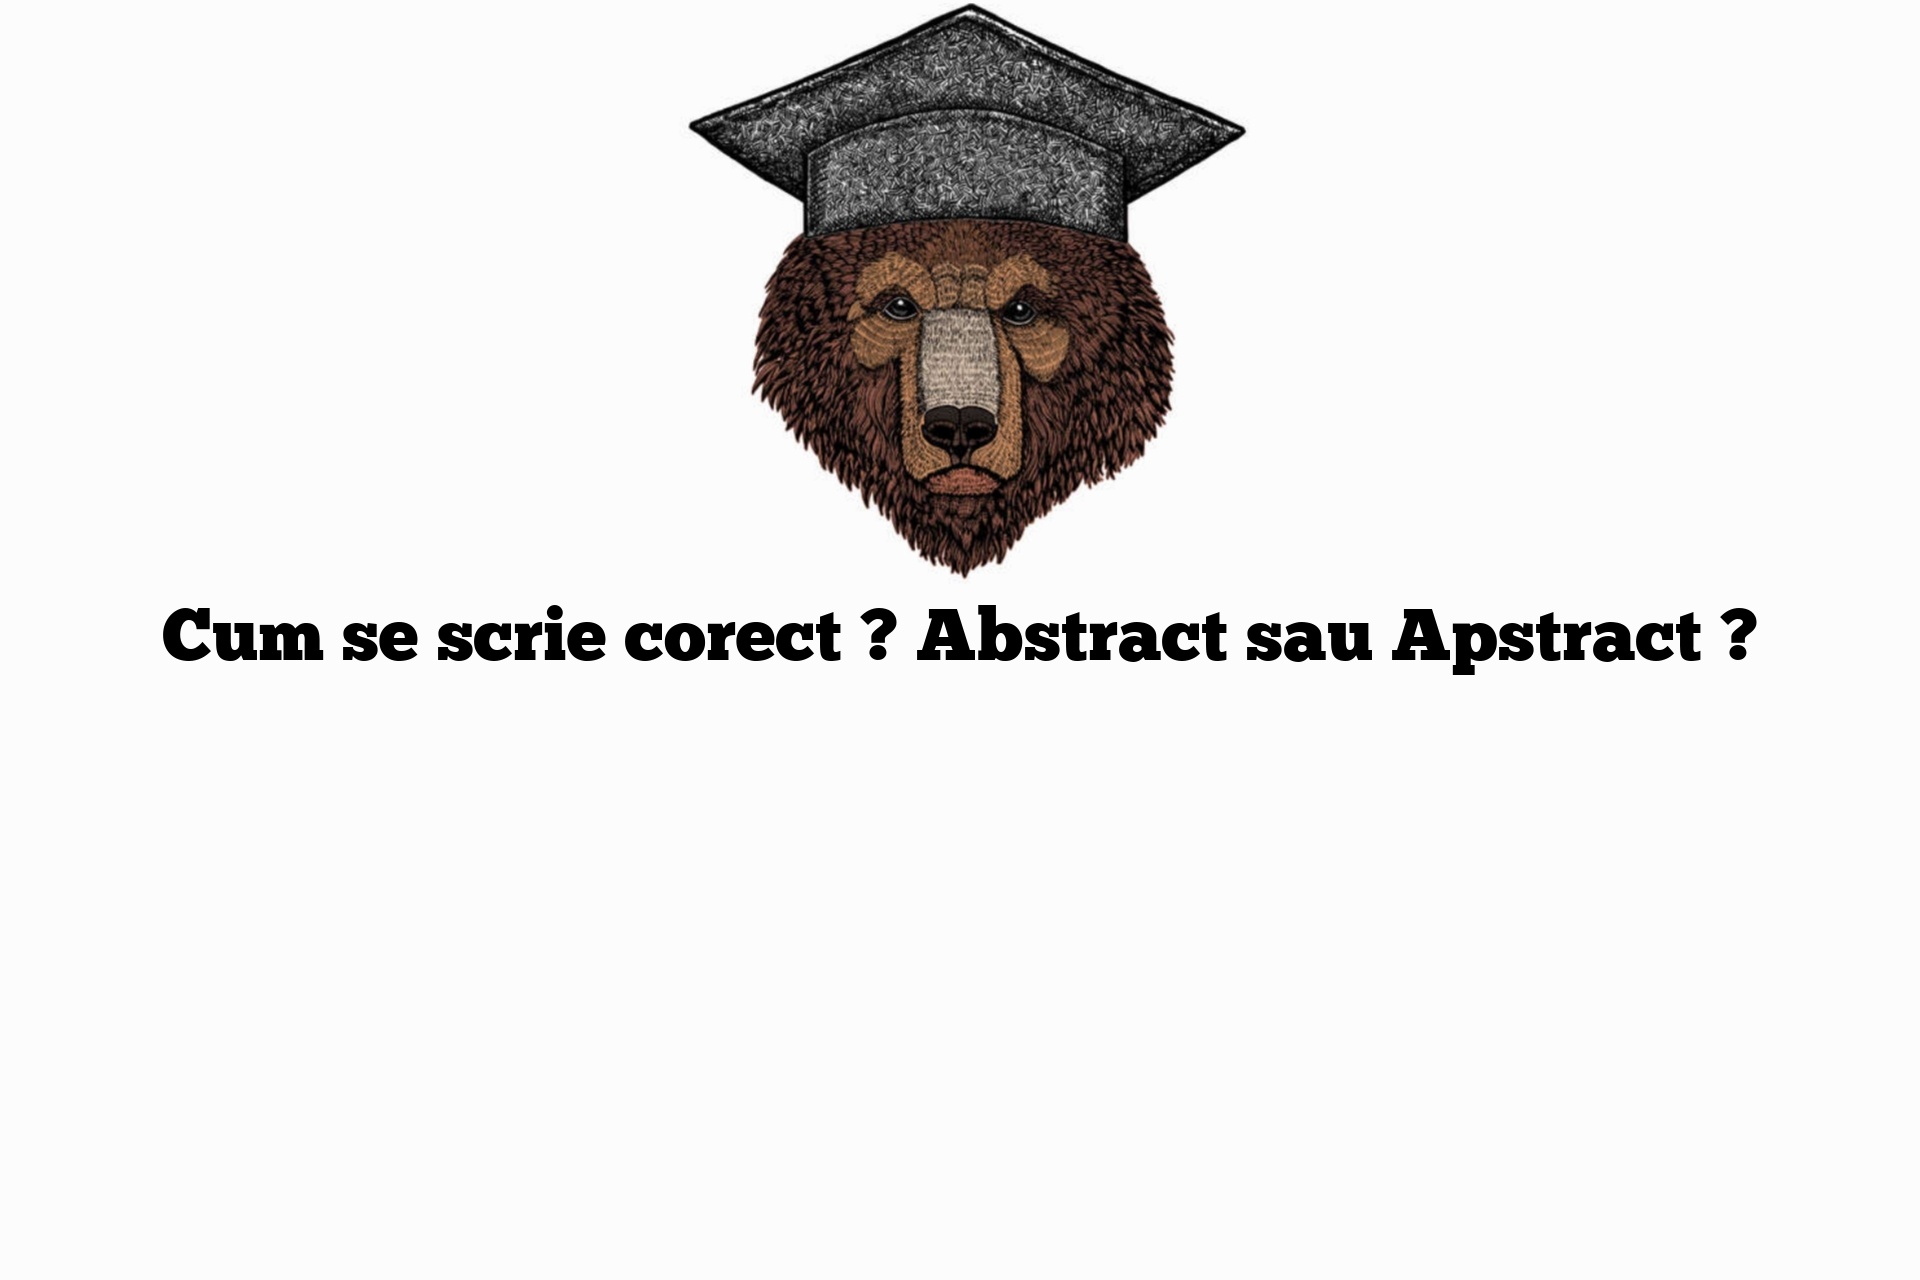 Cum se scrie corect ? Abstract sau Apstract ?